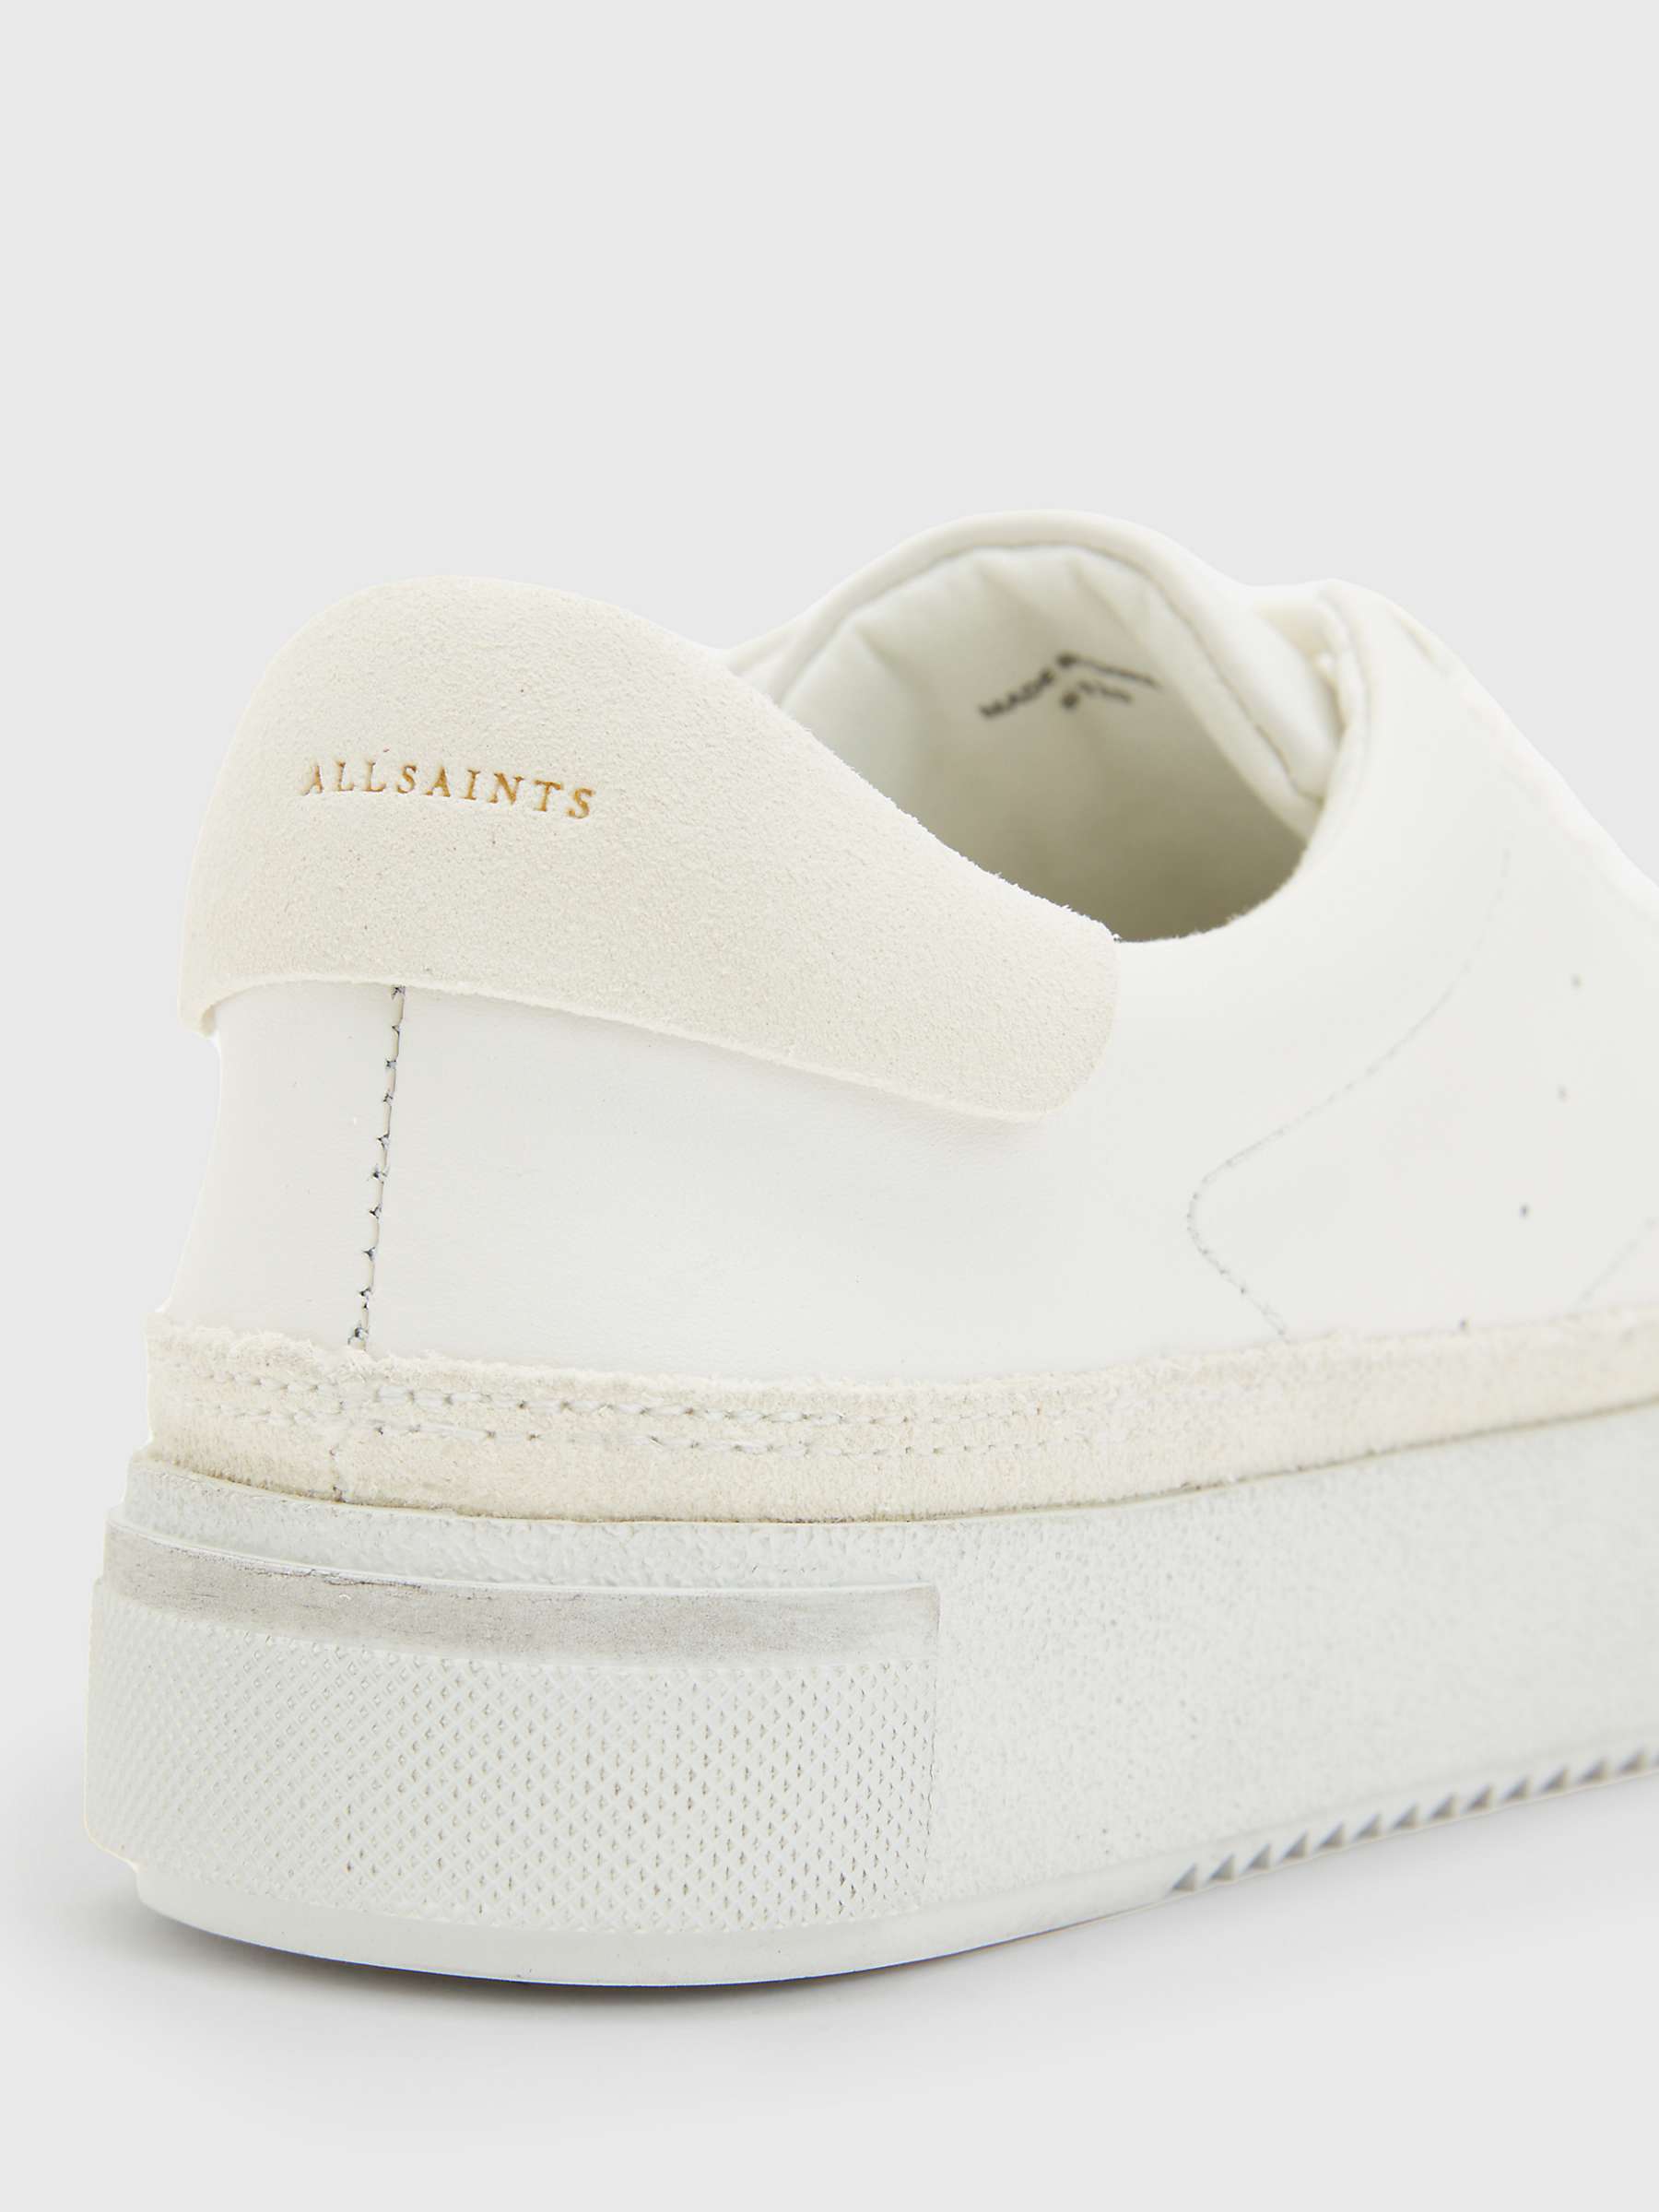 Buy AllSaints Trish Leather Lace Up Trainers, Chalk White Online at johnlewis.com